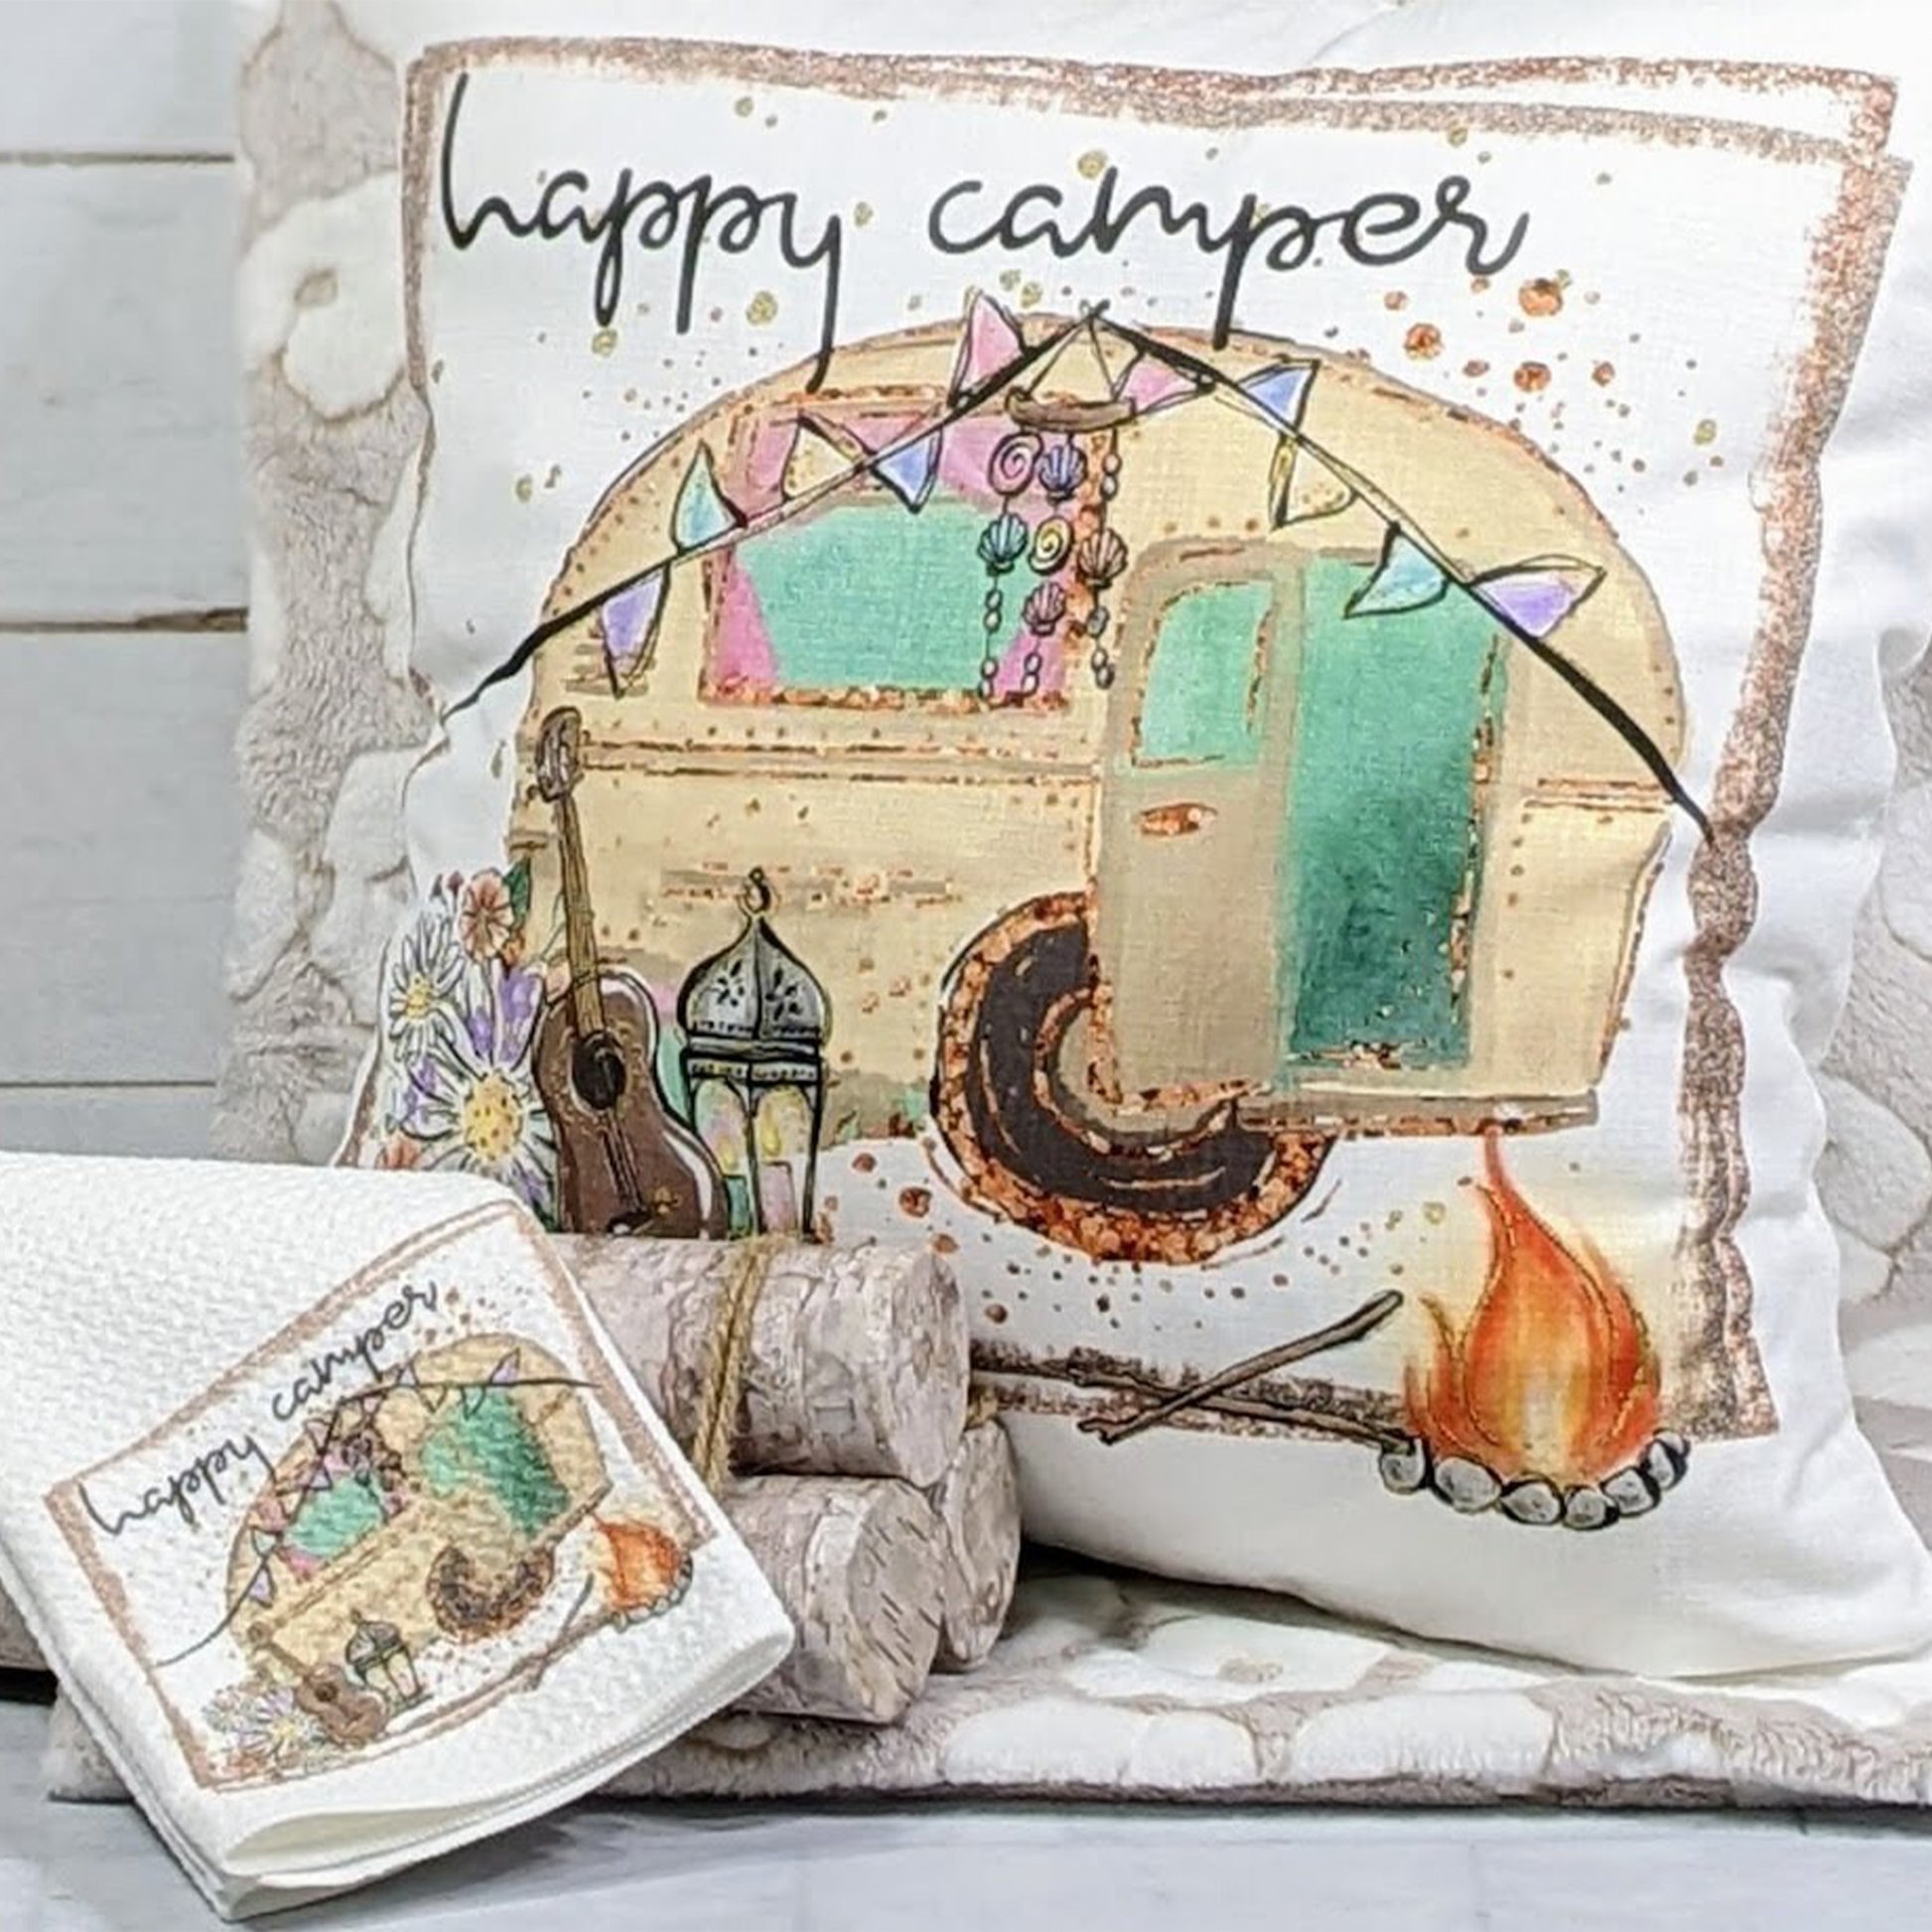 Happy Camper Throw Pillow